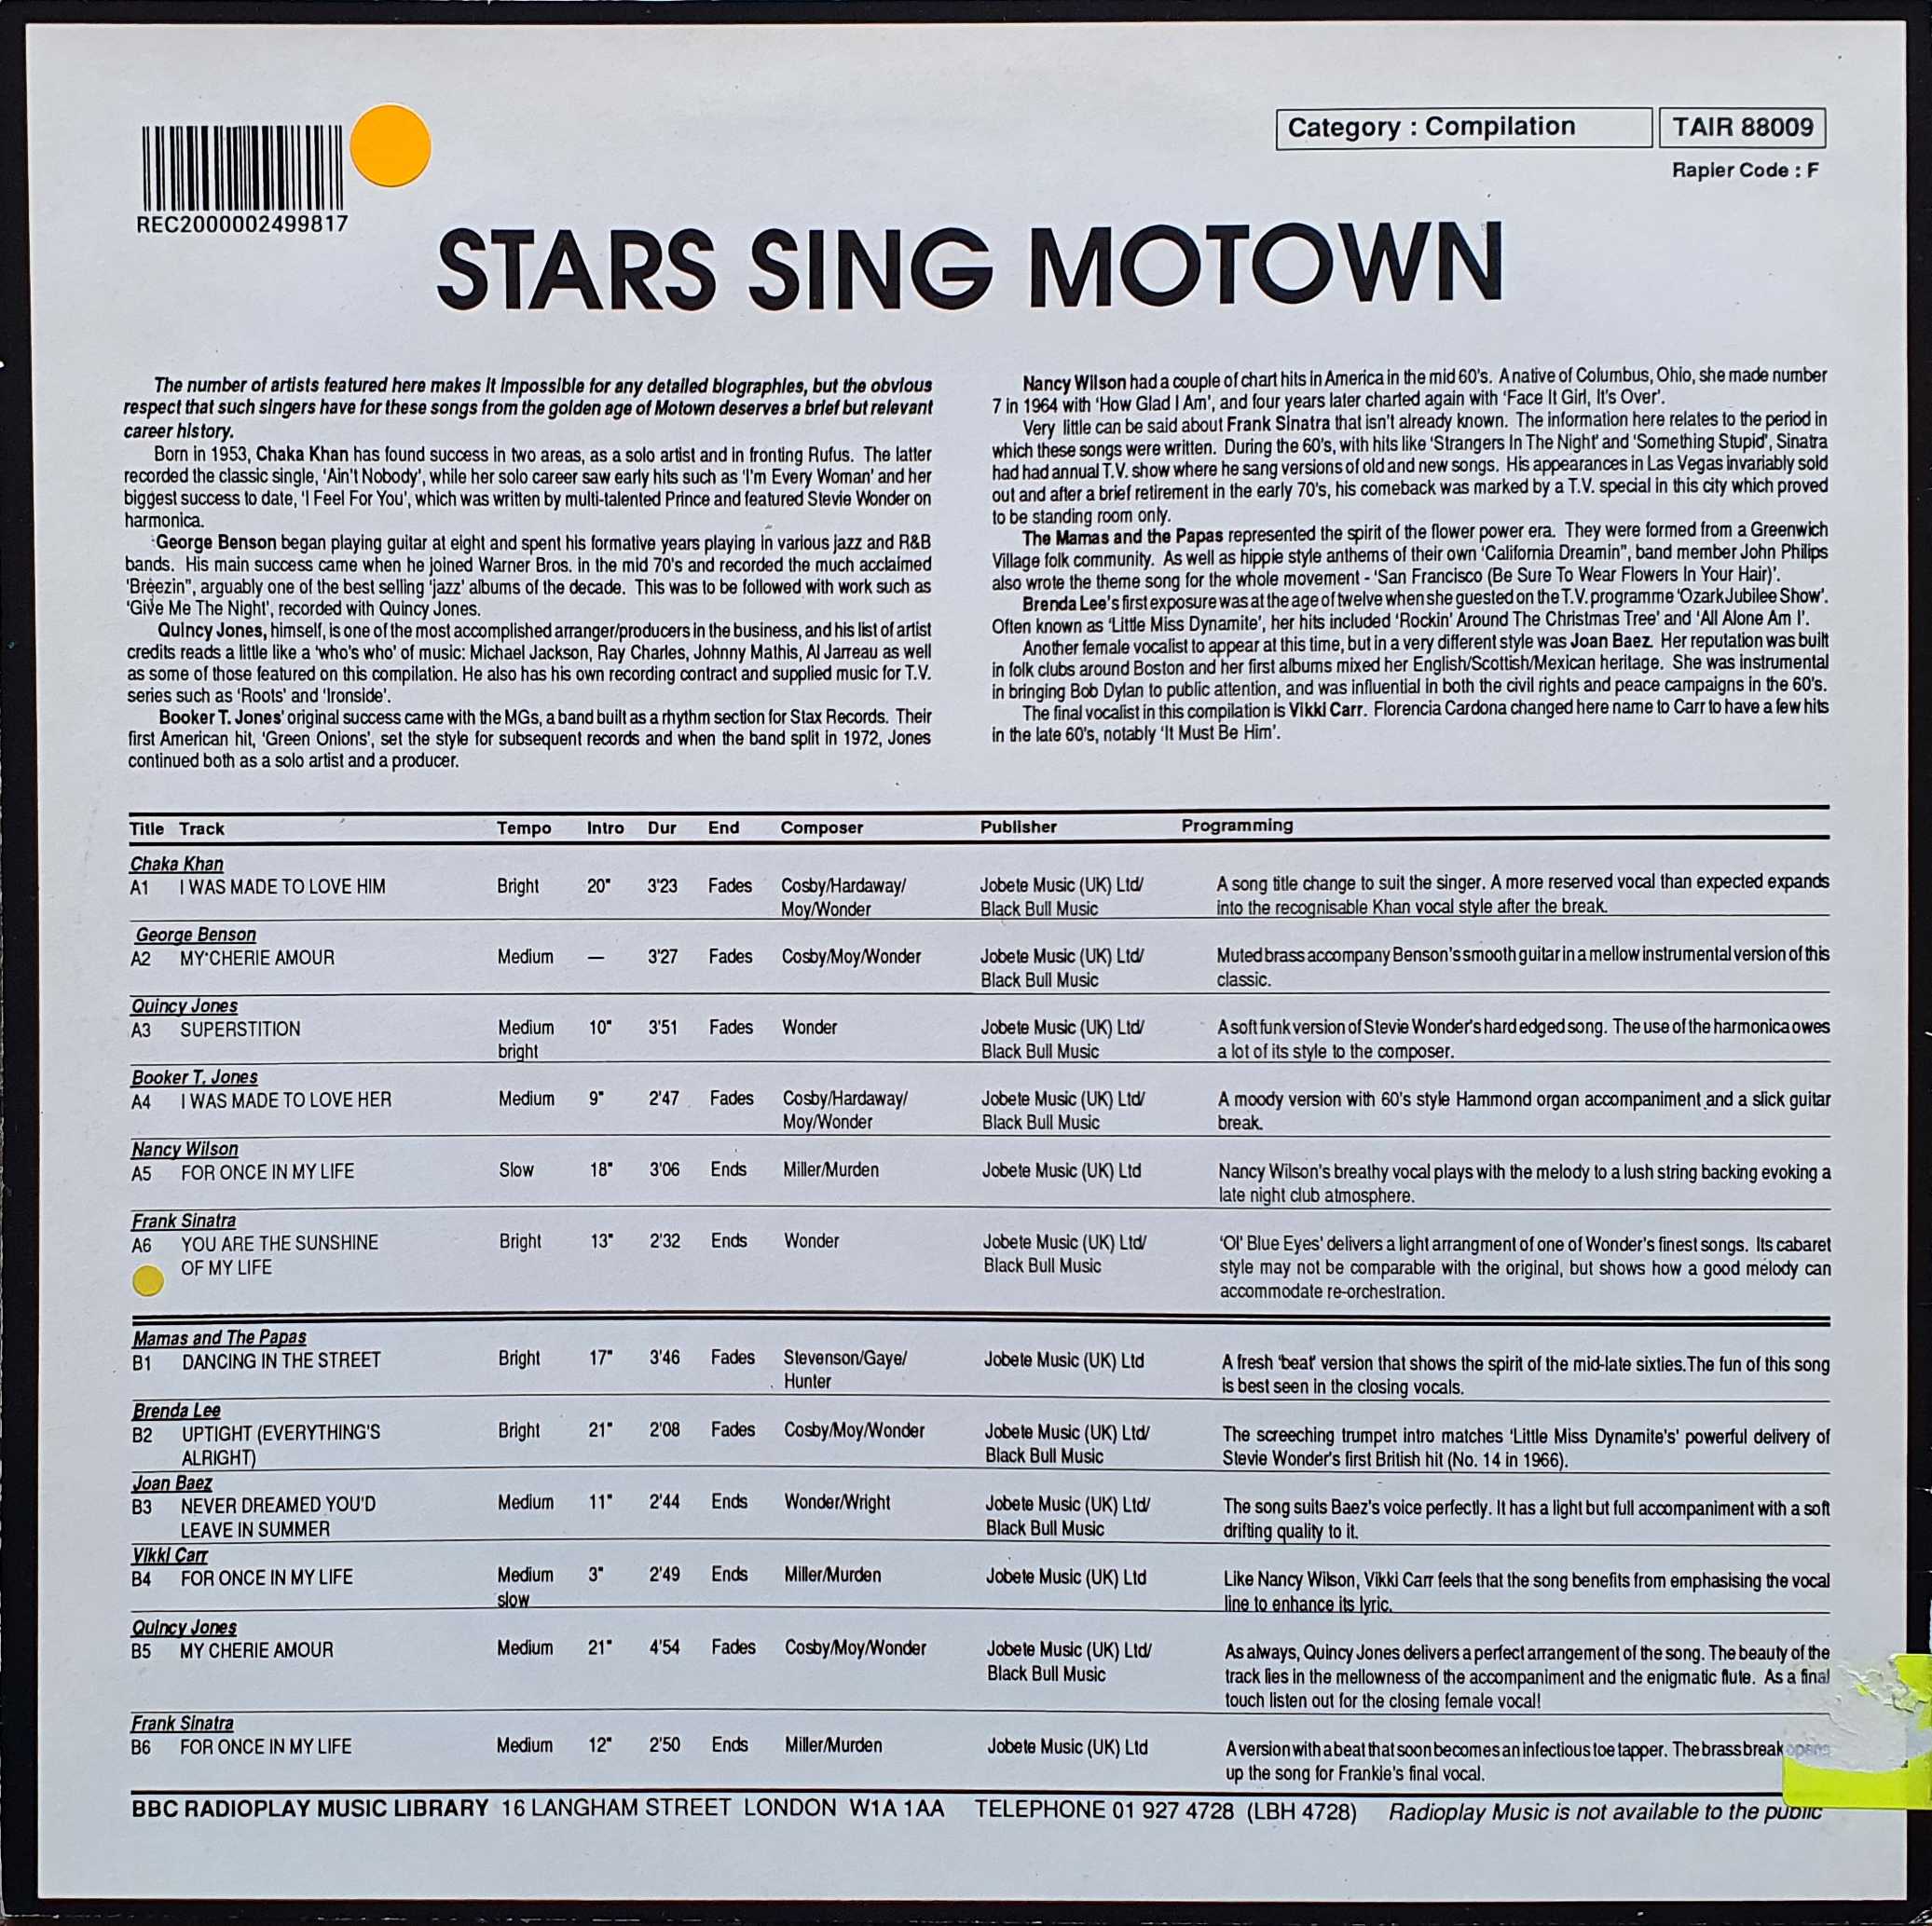 Picture of TAIR 88009 Stars sing Motown by artist Various from the BBC records and Tapes library